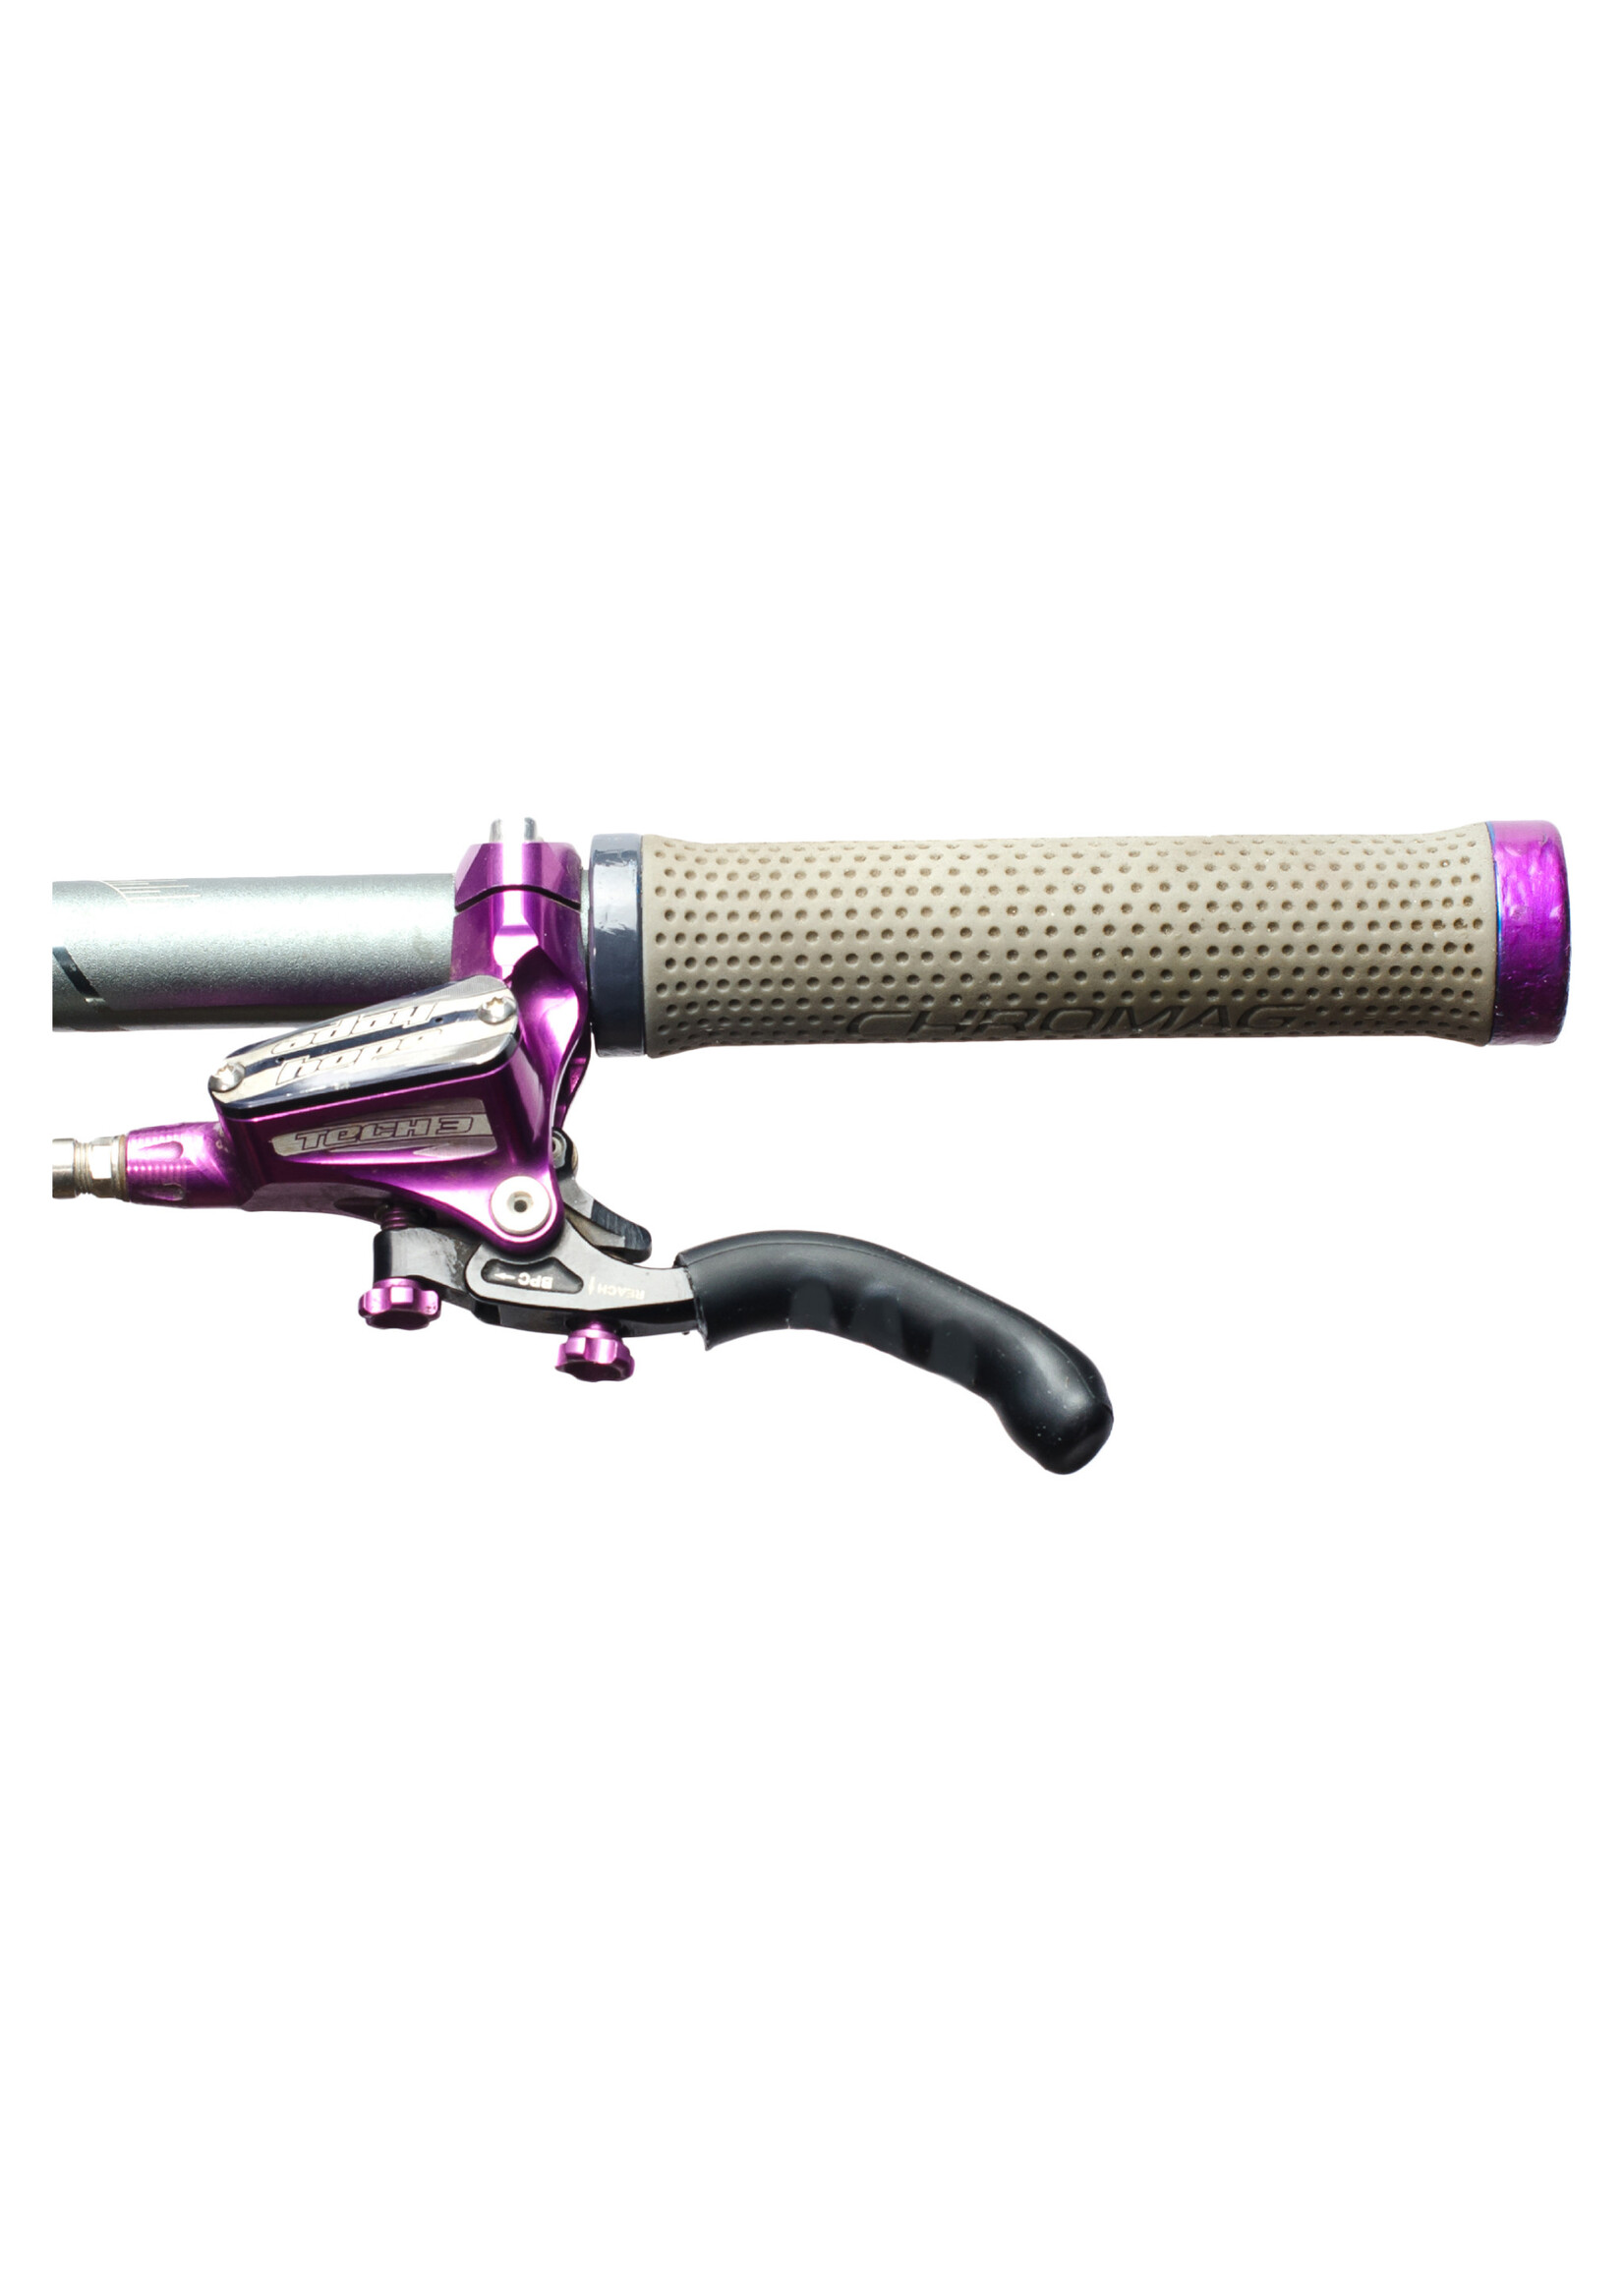 MILES WIDE GRIPS MILES WIDE BRAKE LEVER STICKY FINGERS 2.0 BK